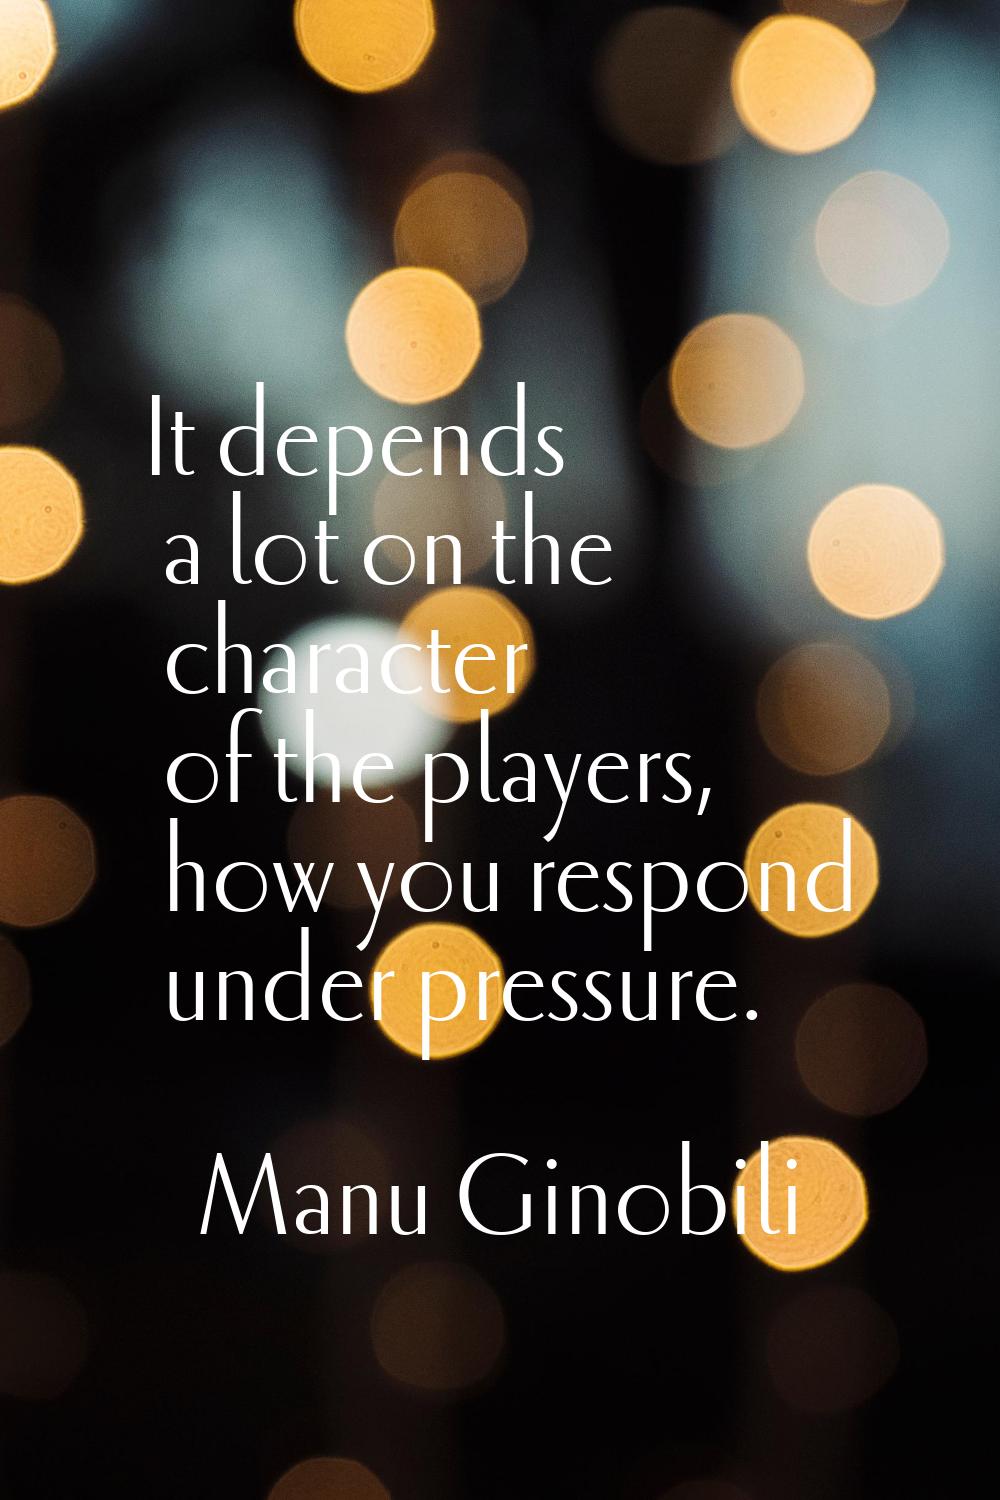 It depends a lot on the character of the players, how you respond under pressure.